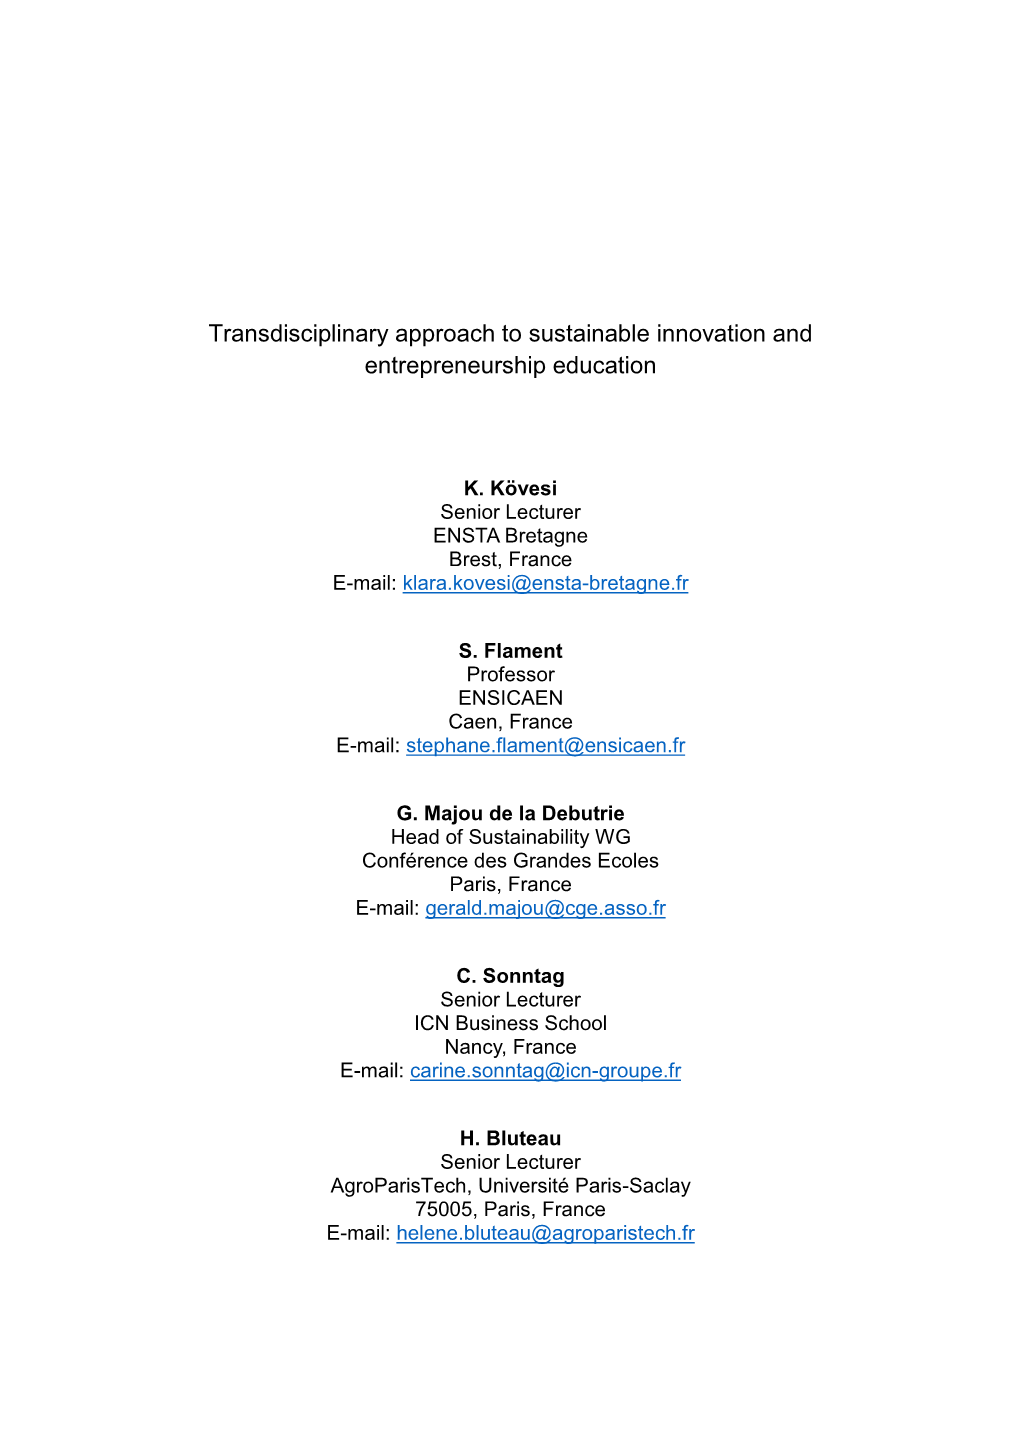 Transdisciplinary Approach to Sustainable Innovation and Entrepreneurship Education